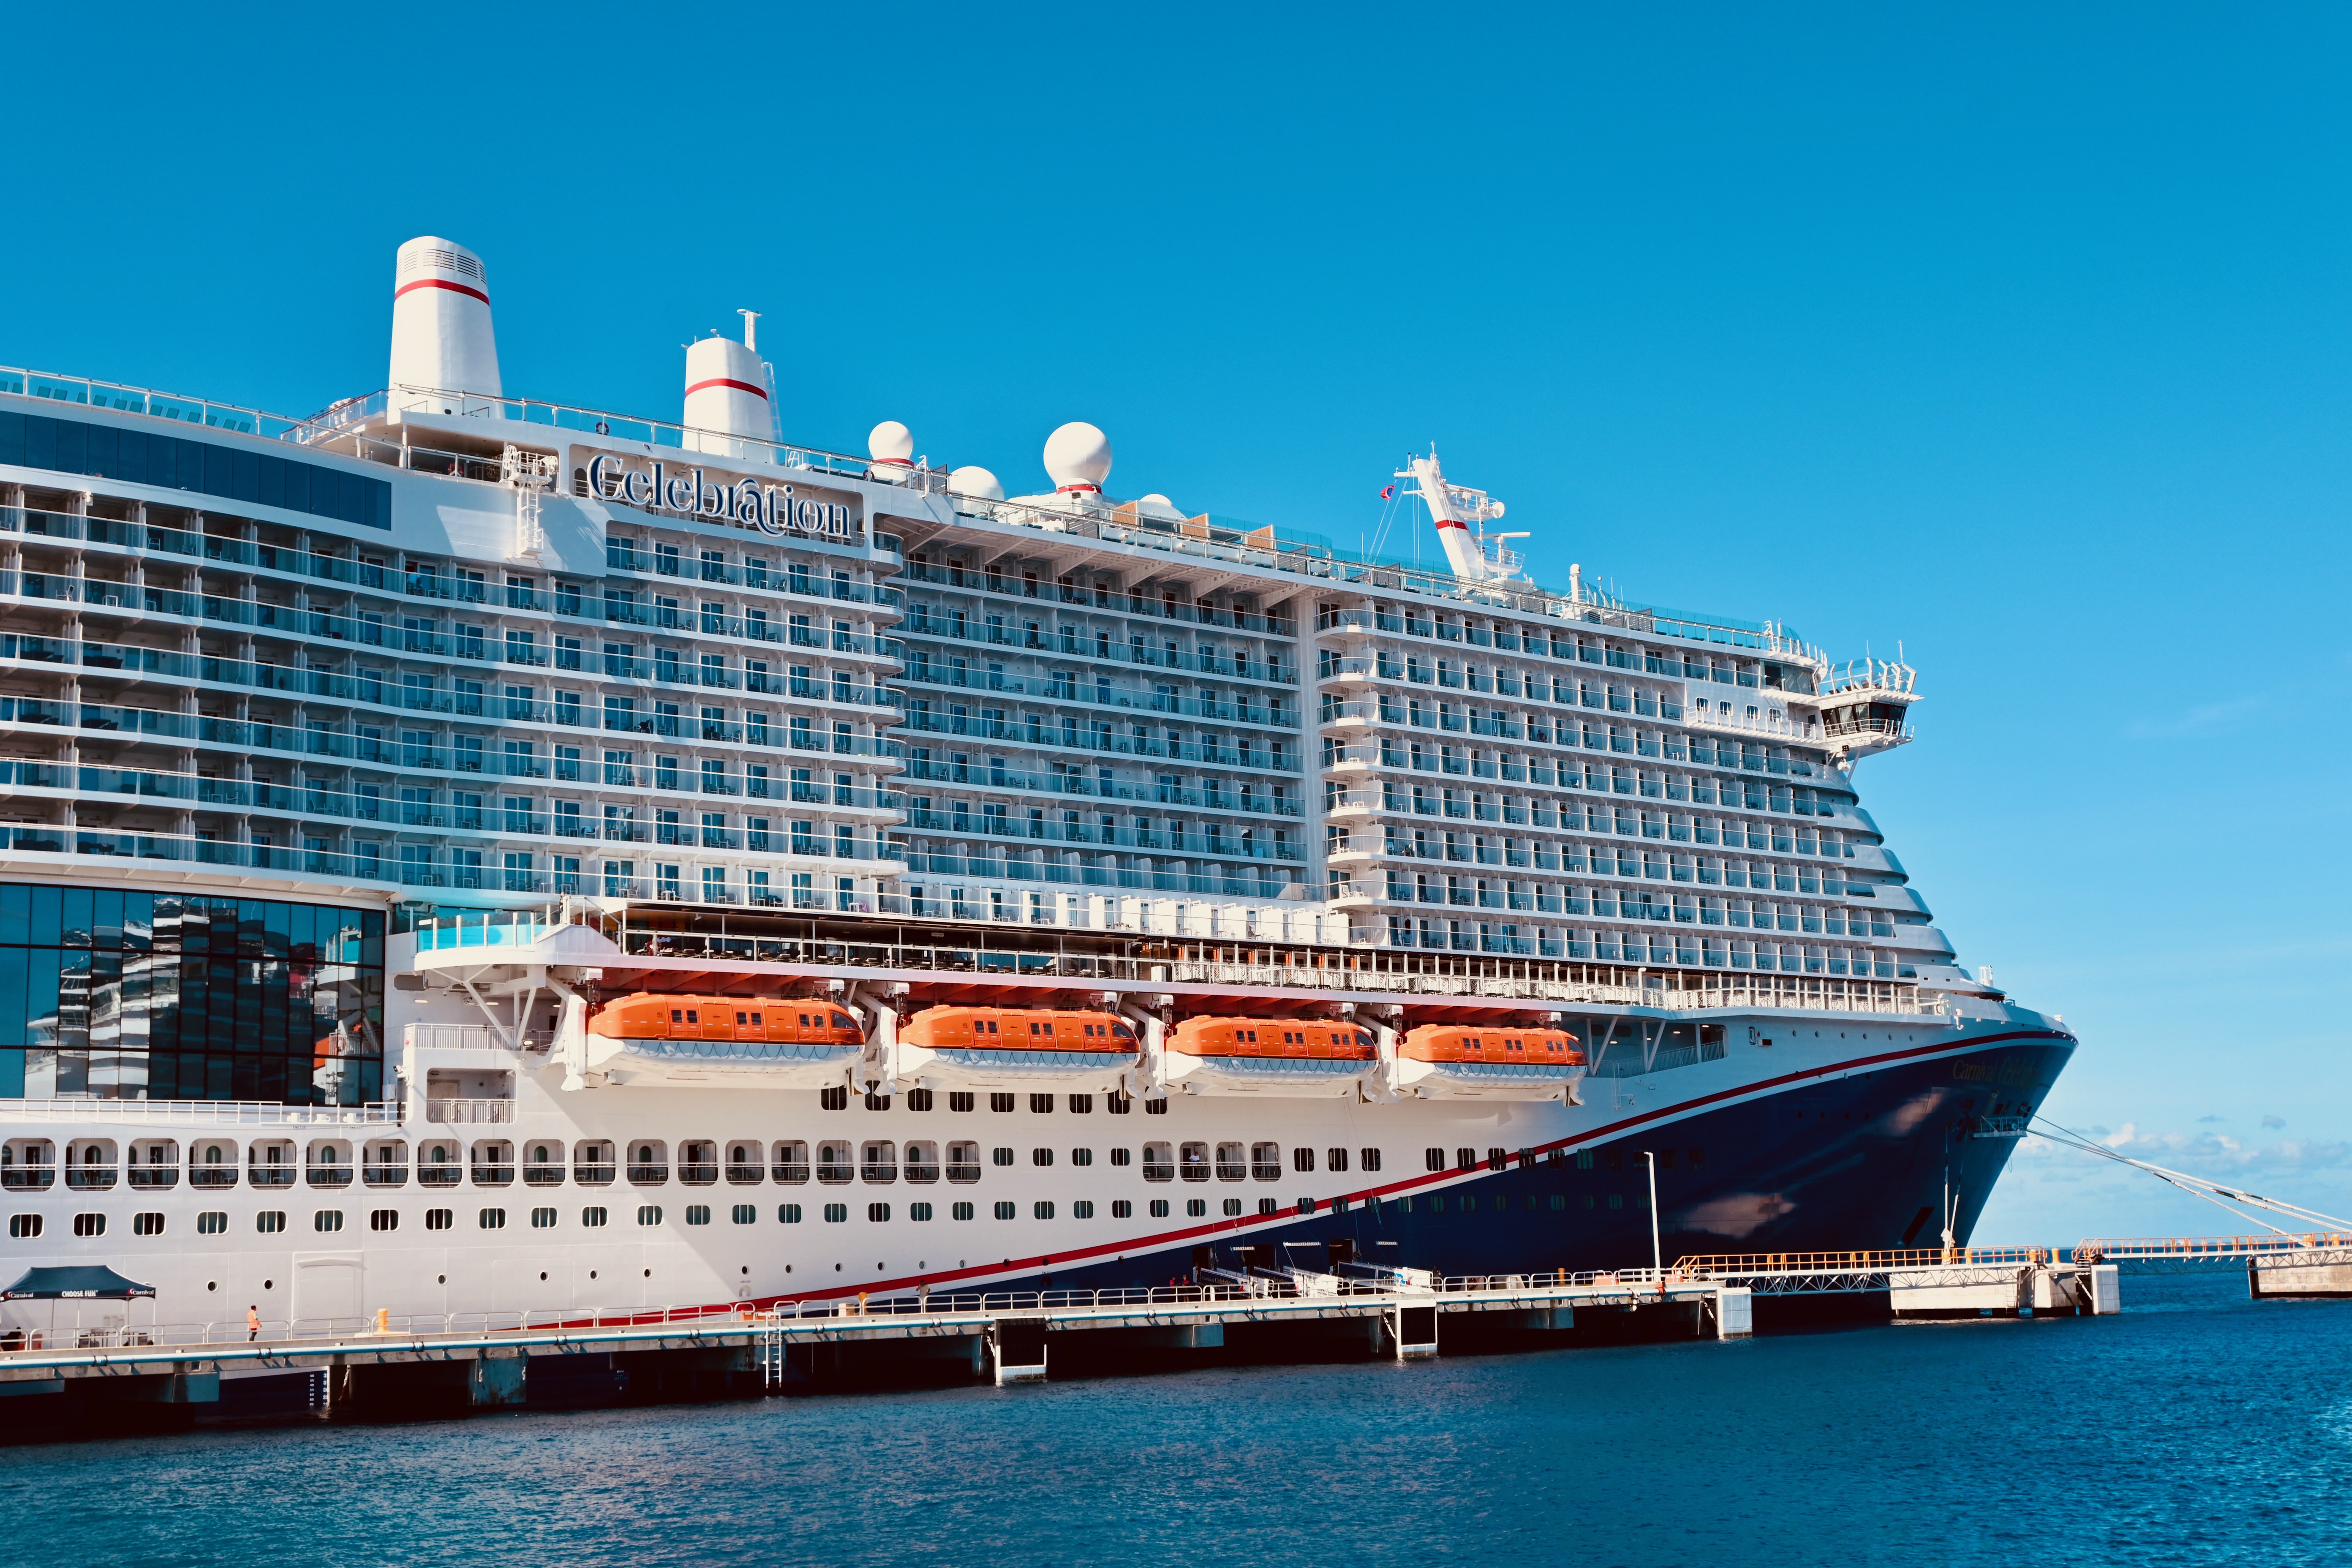 Carnival Celebration: What guests need to know about the new ship